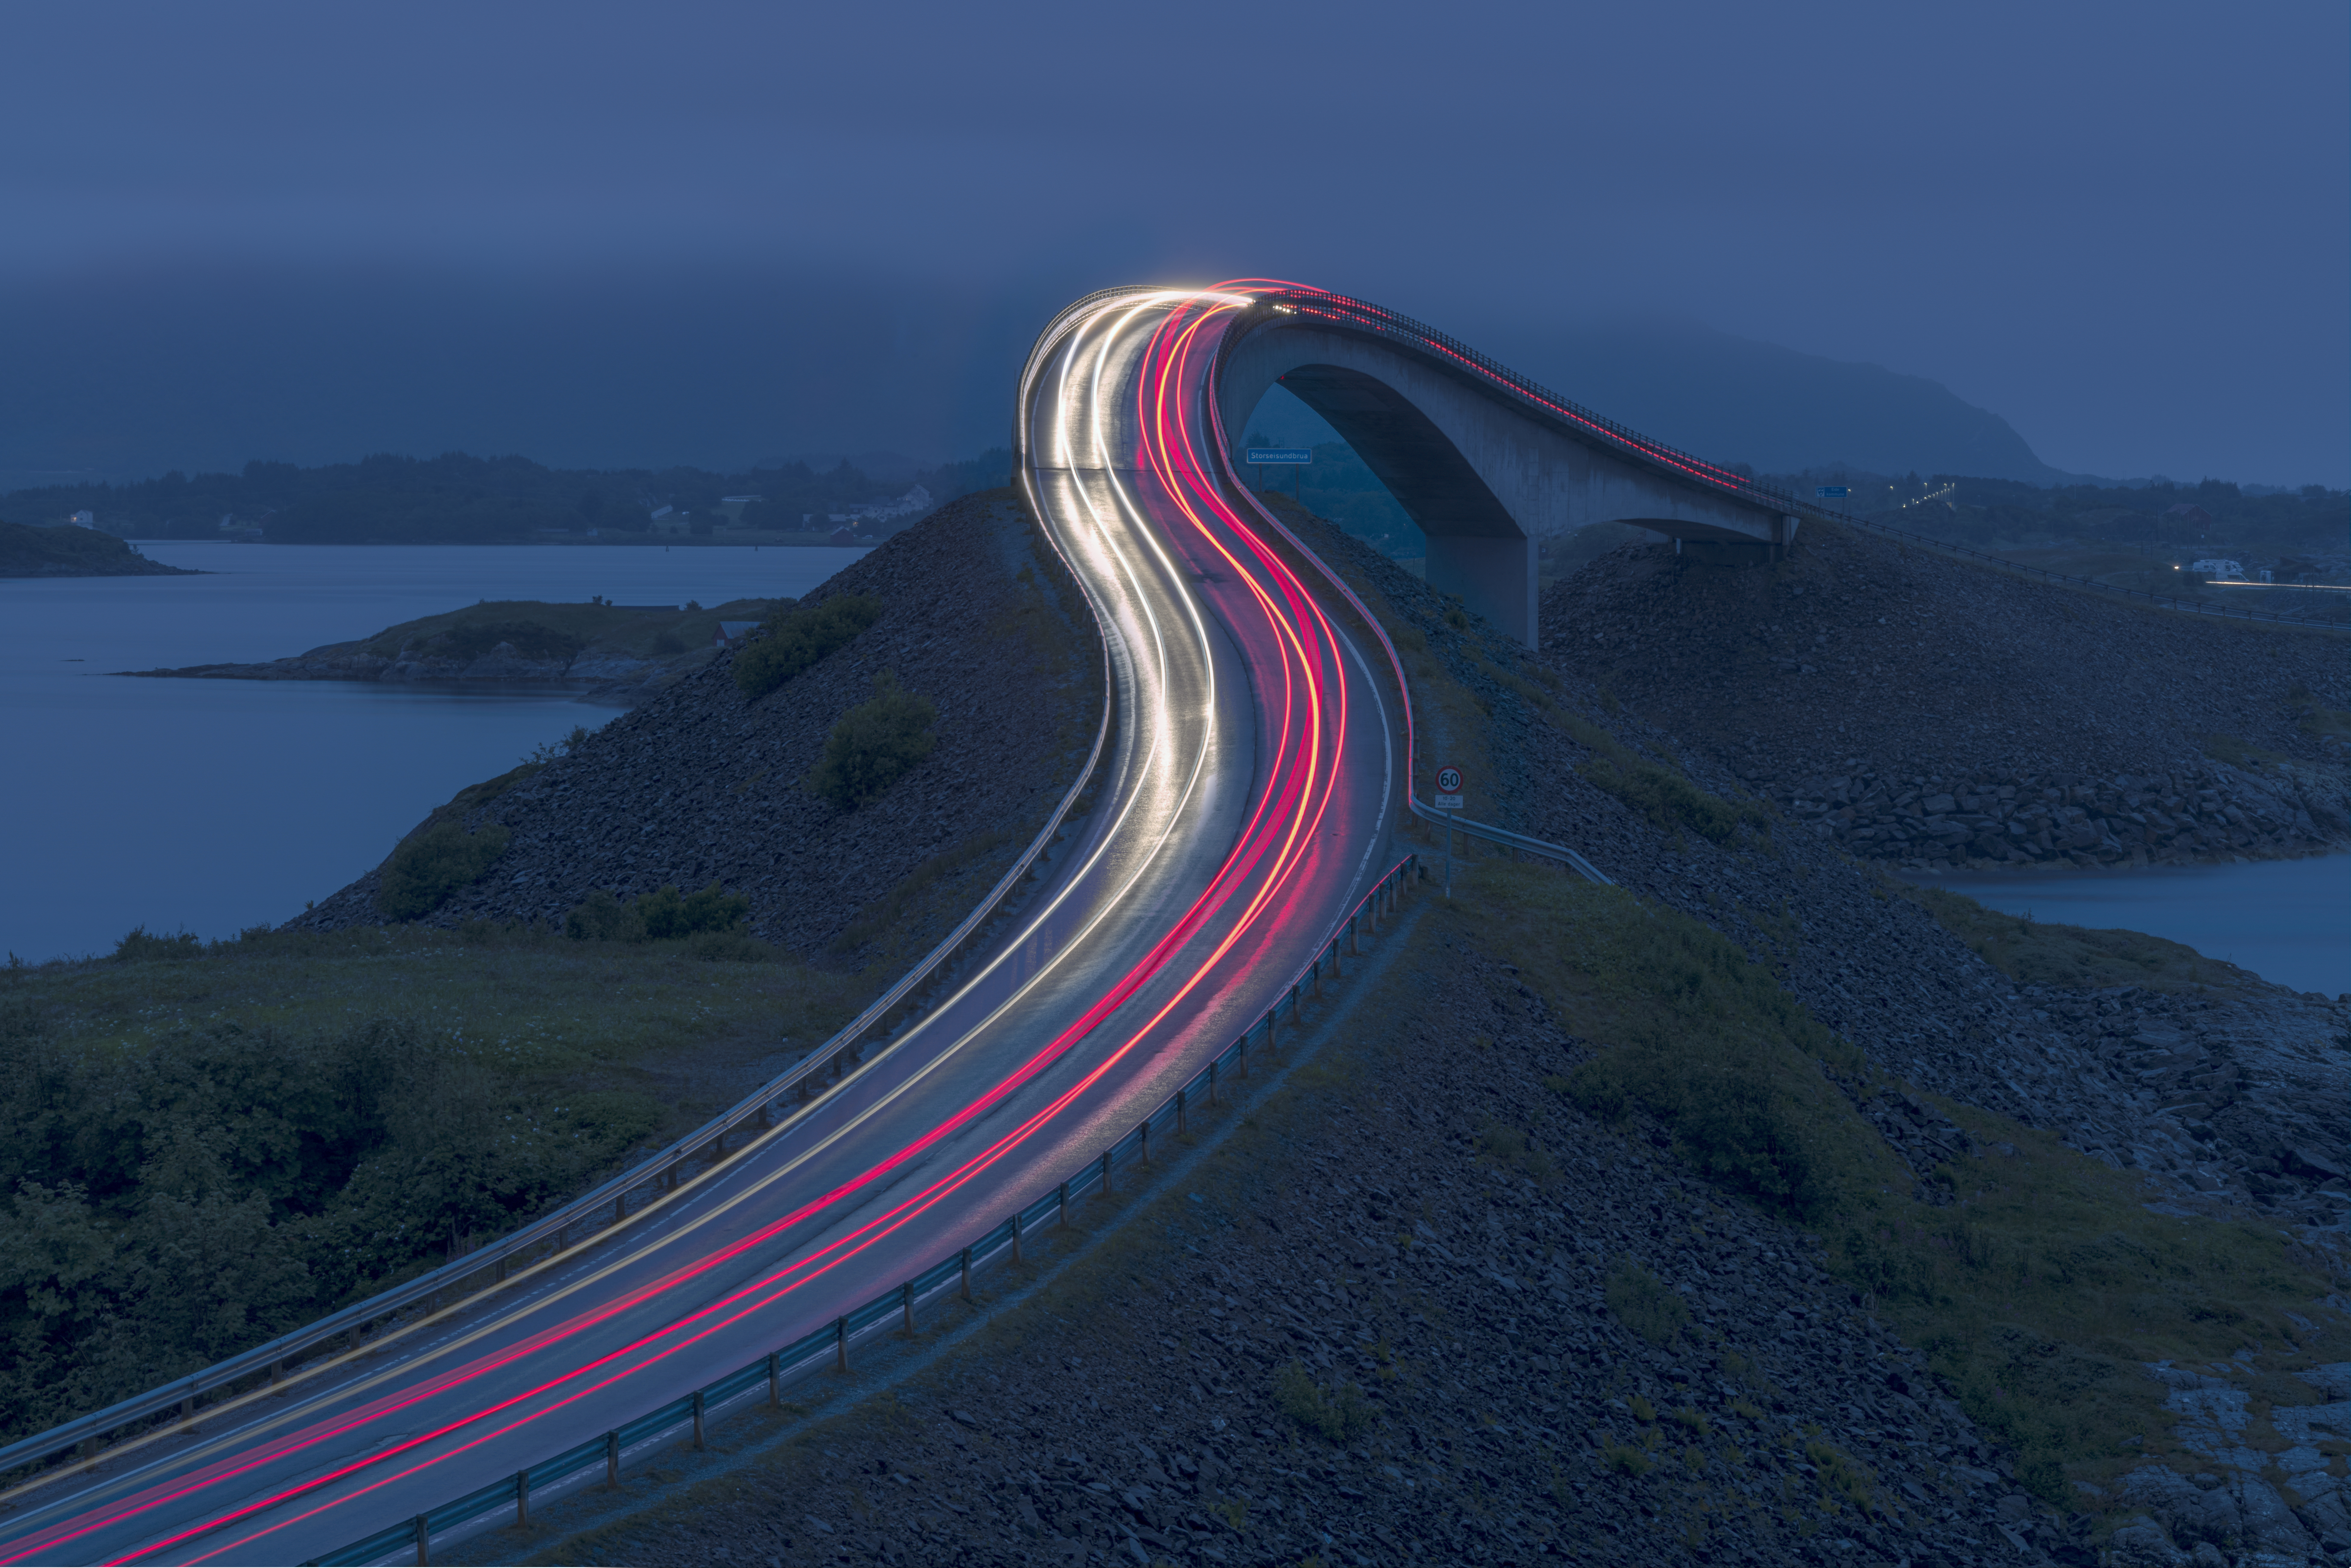 The streaking lights of cars on a beautiful Norway road at night.